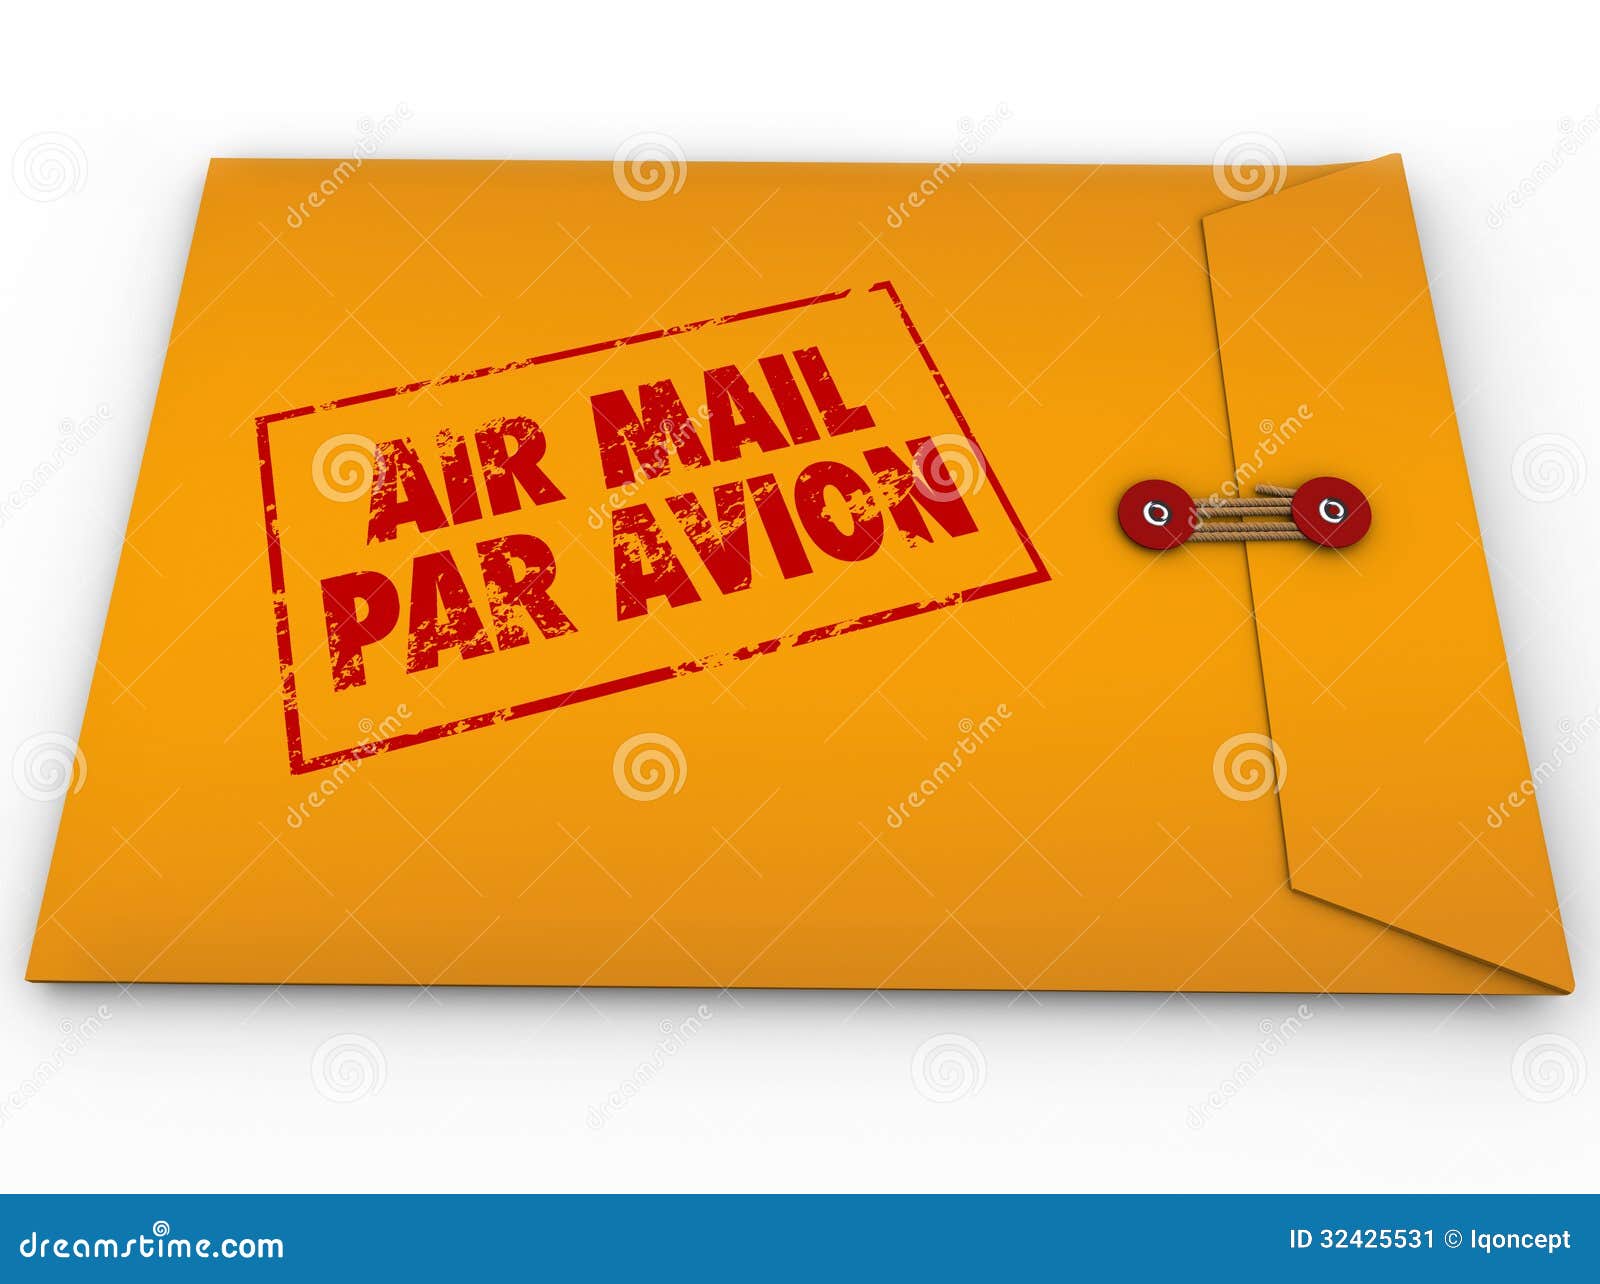 yellow envelope airmail stamp par avion express delivery